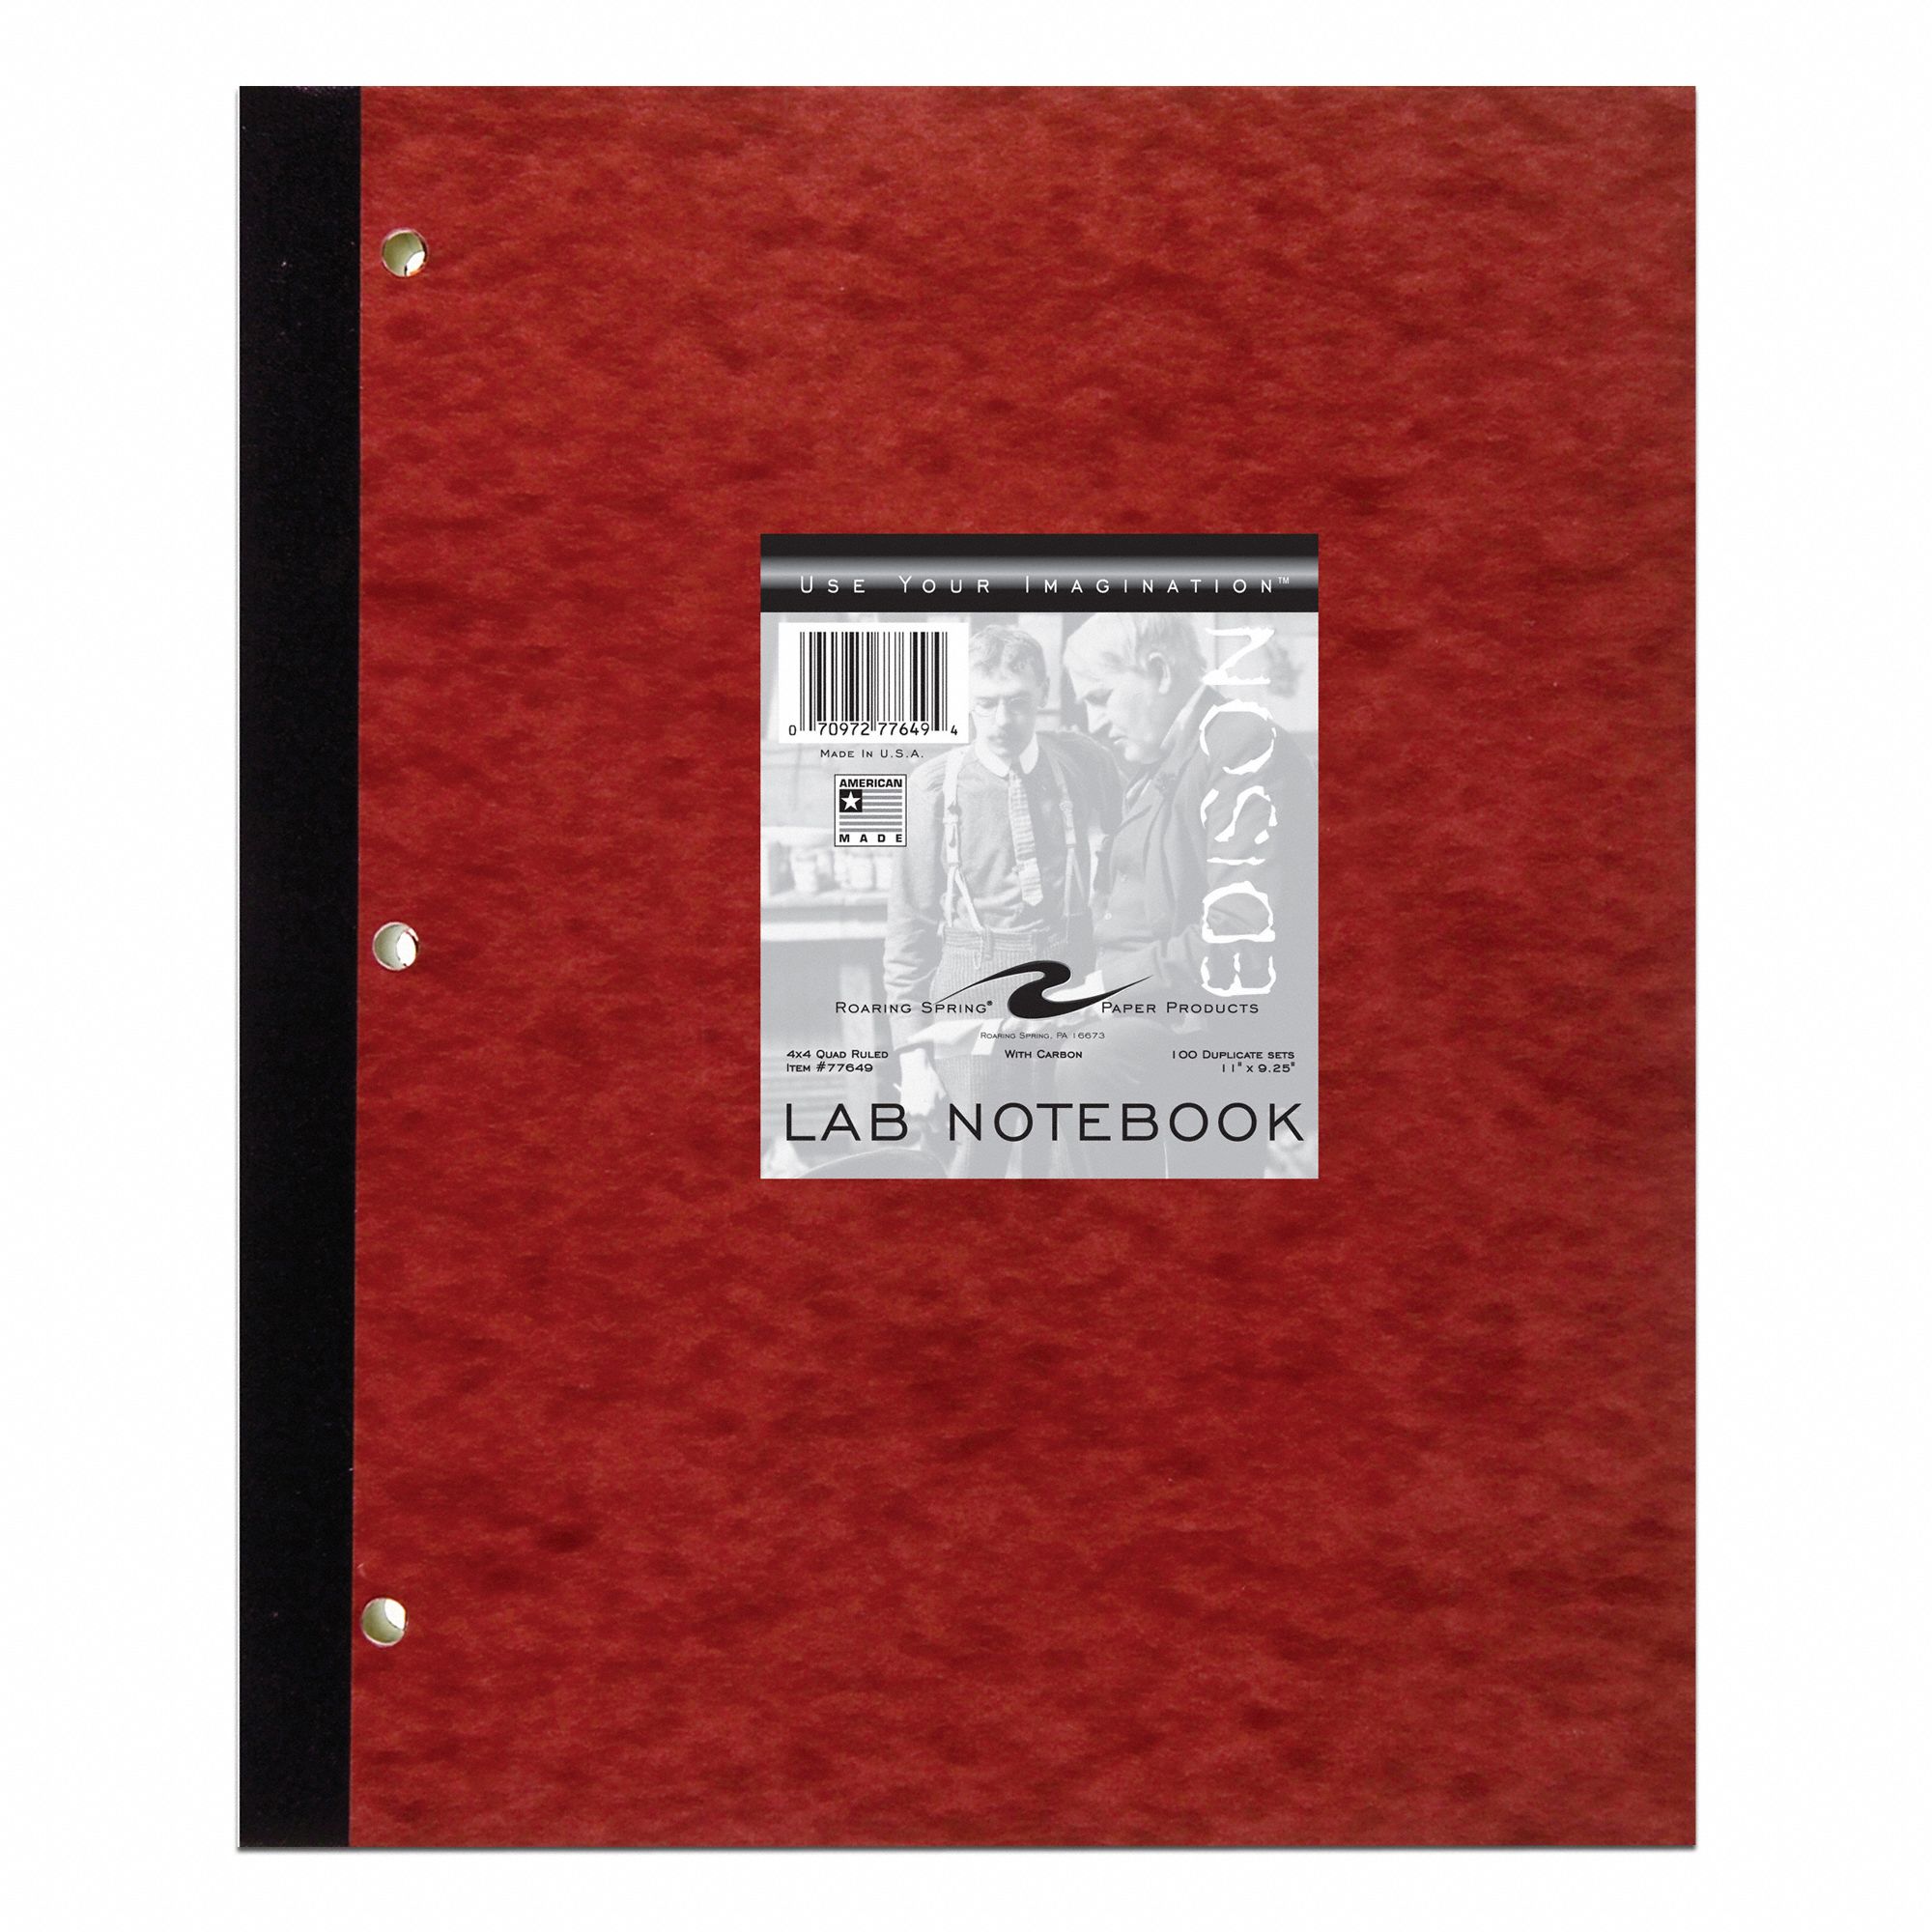 Notebook: Quadrille, Nonwirebound, 200 Sheets, Pages Numbered, 2 Carbon Sheets, Left